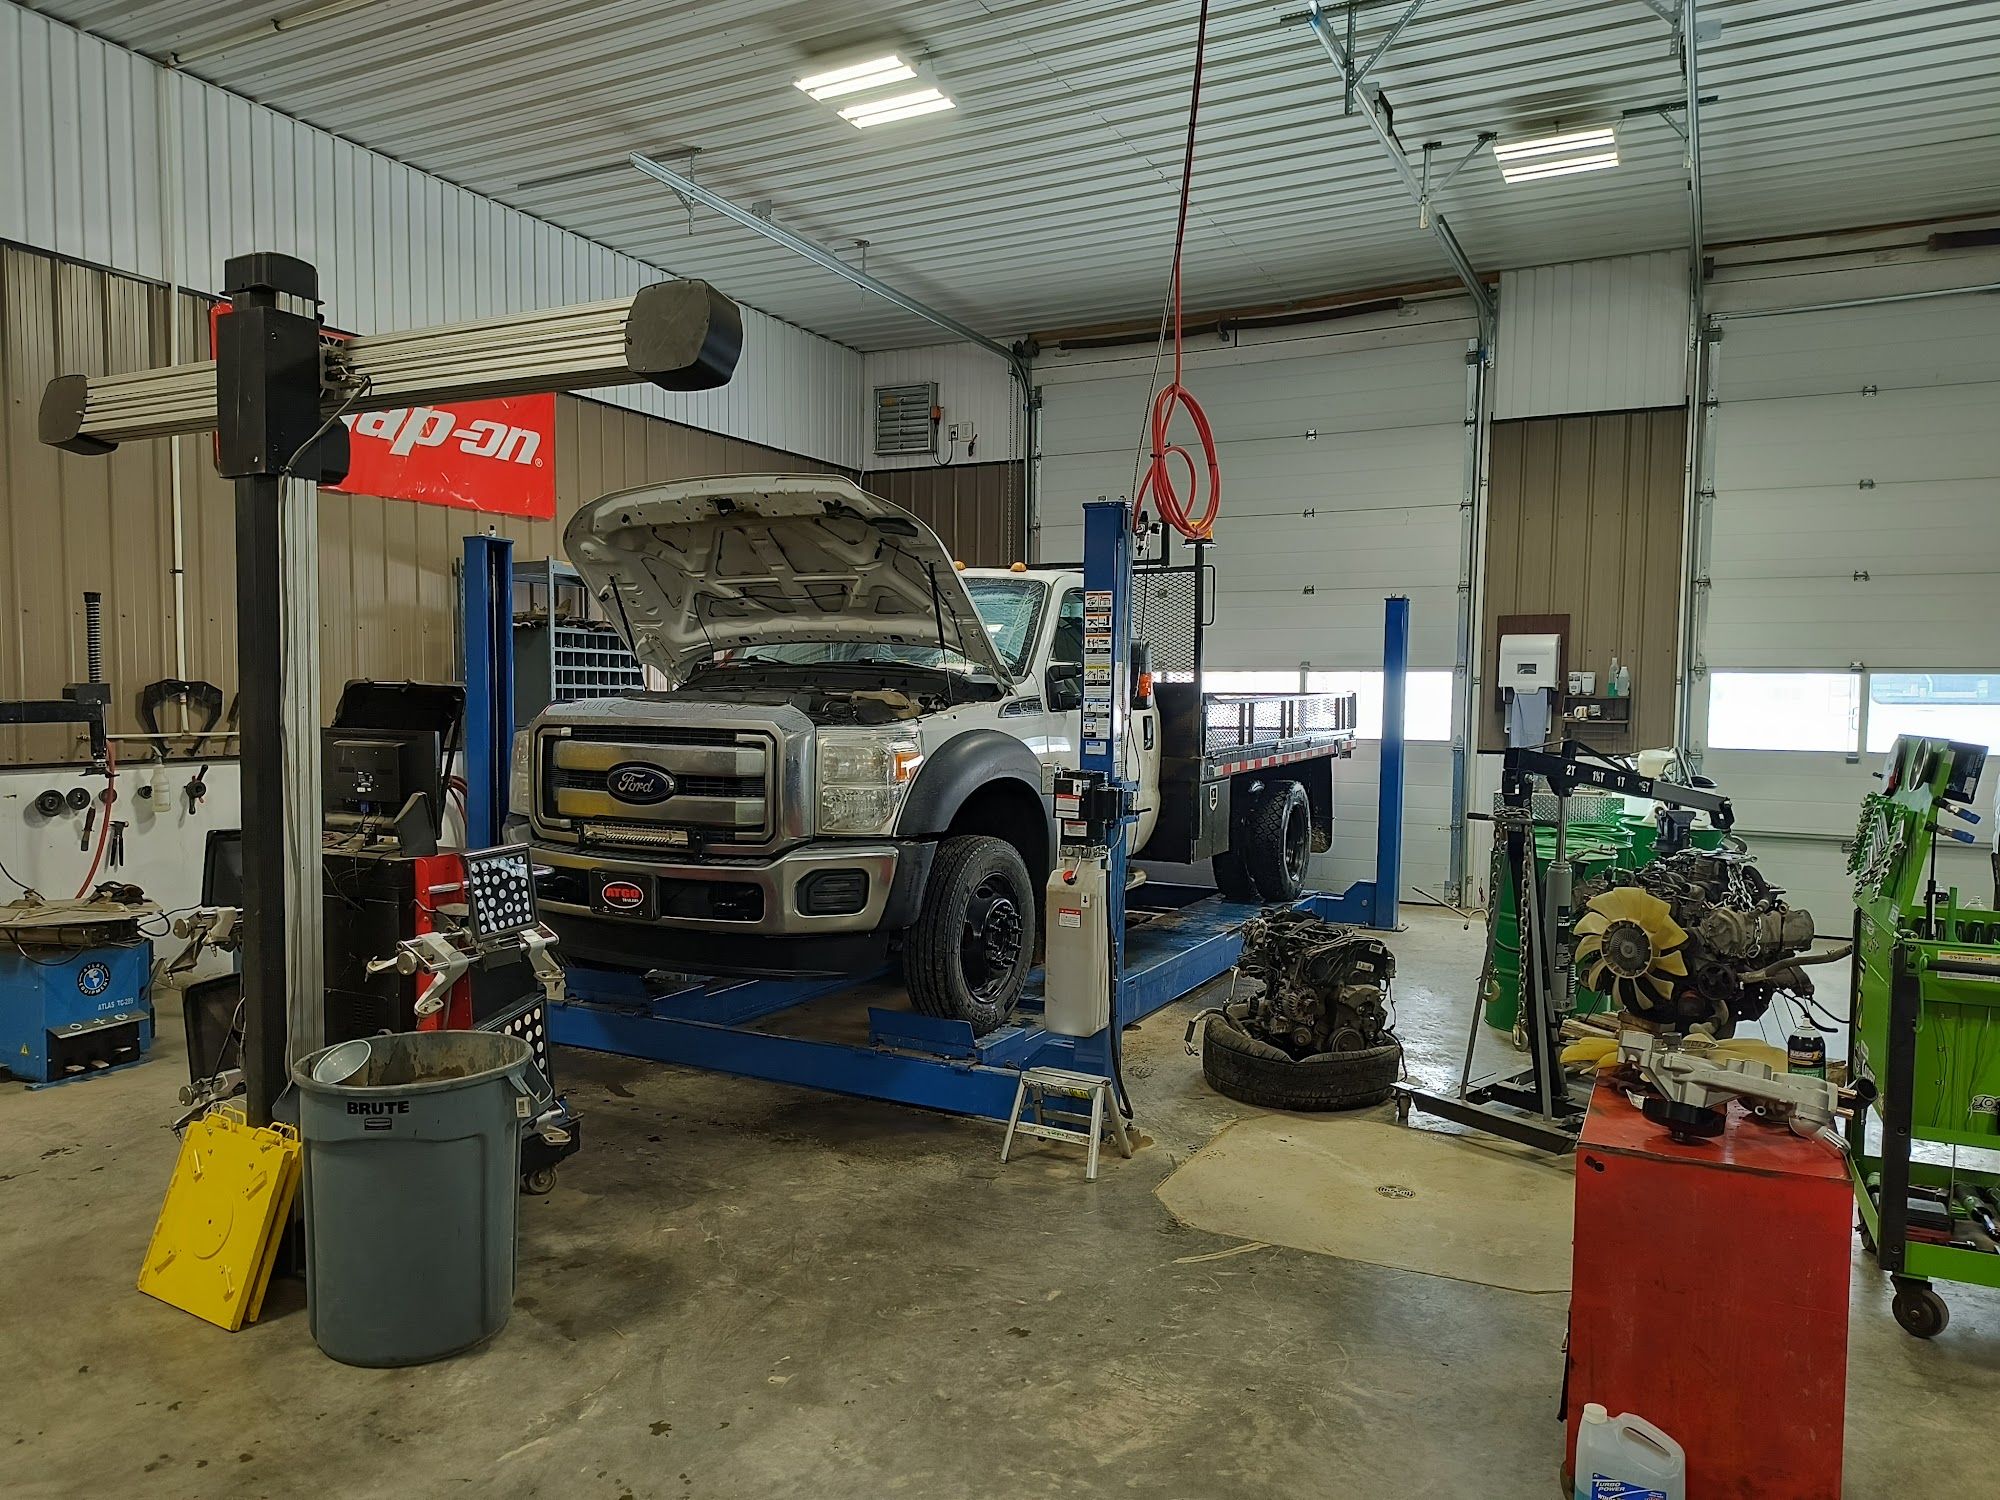 Zimm Auto Service and Repair 513 Main St, Youngstown Alberta T0J 3P0